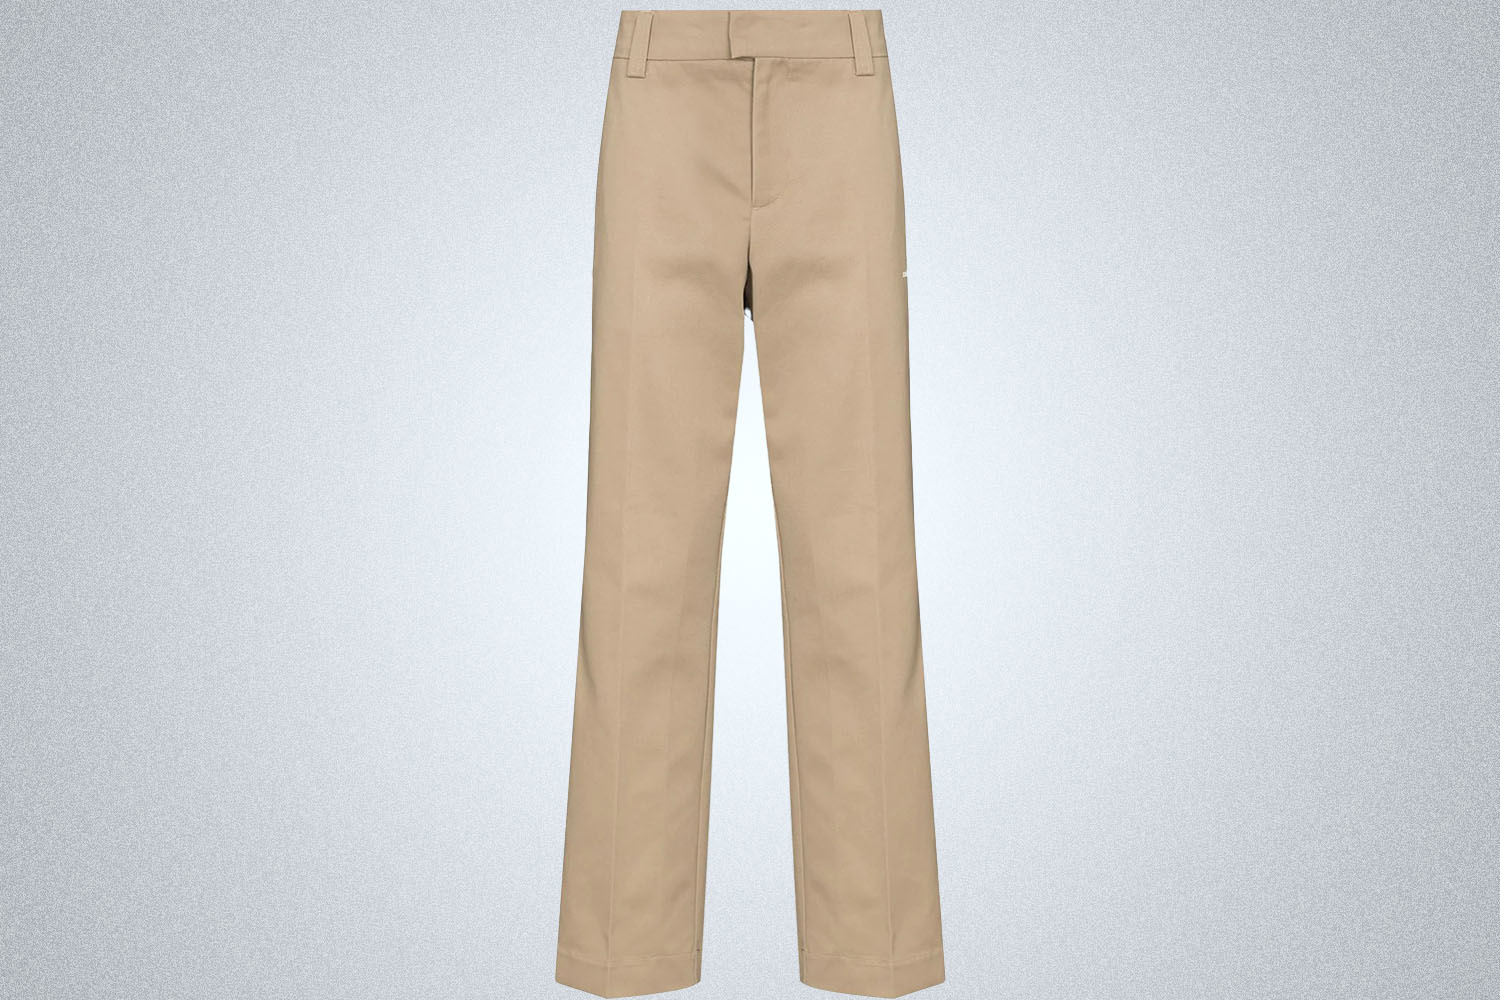 a pair of straight fit tan trousers from soulland on a grey background